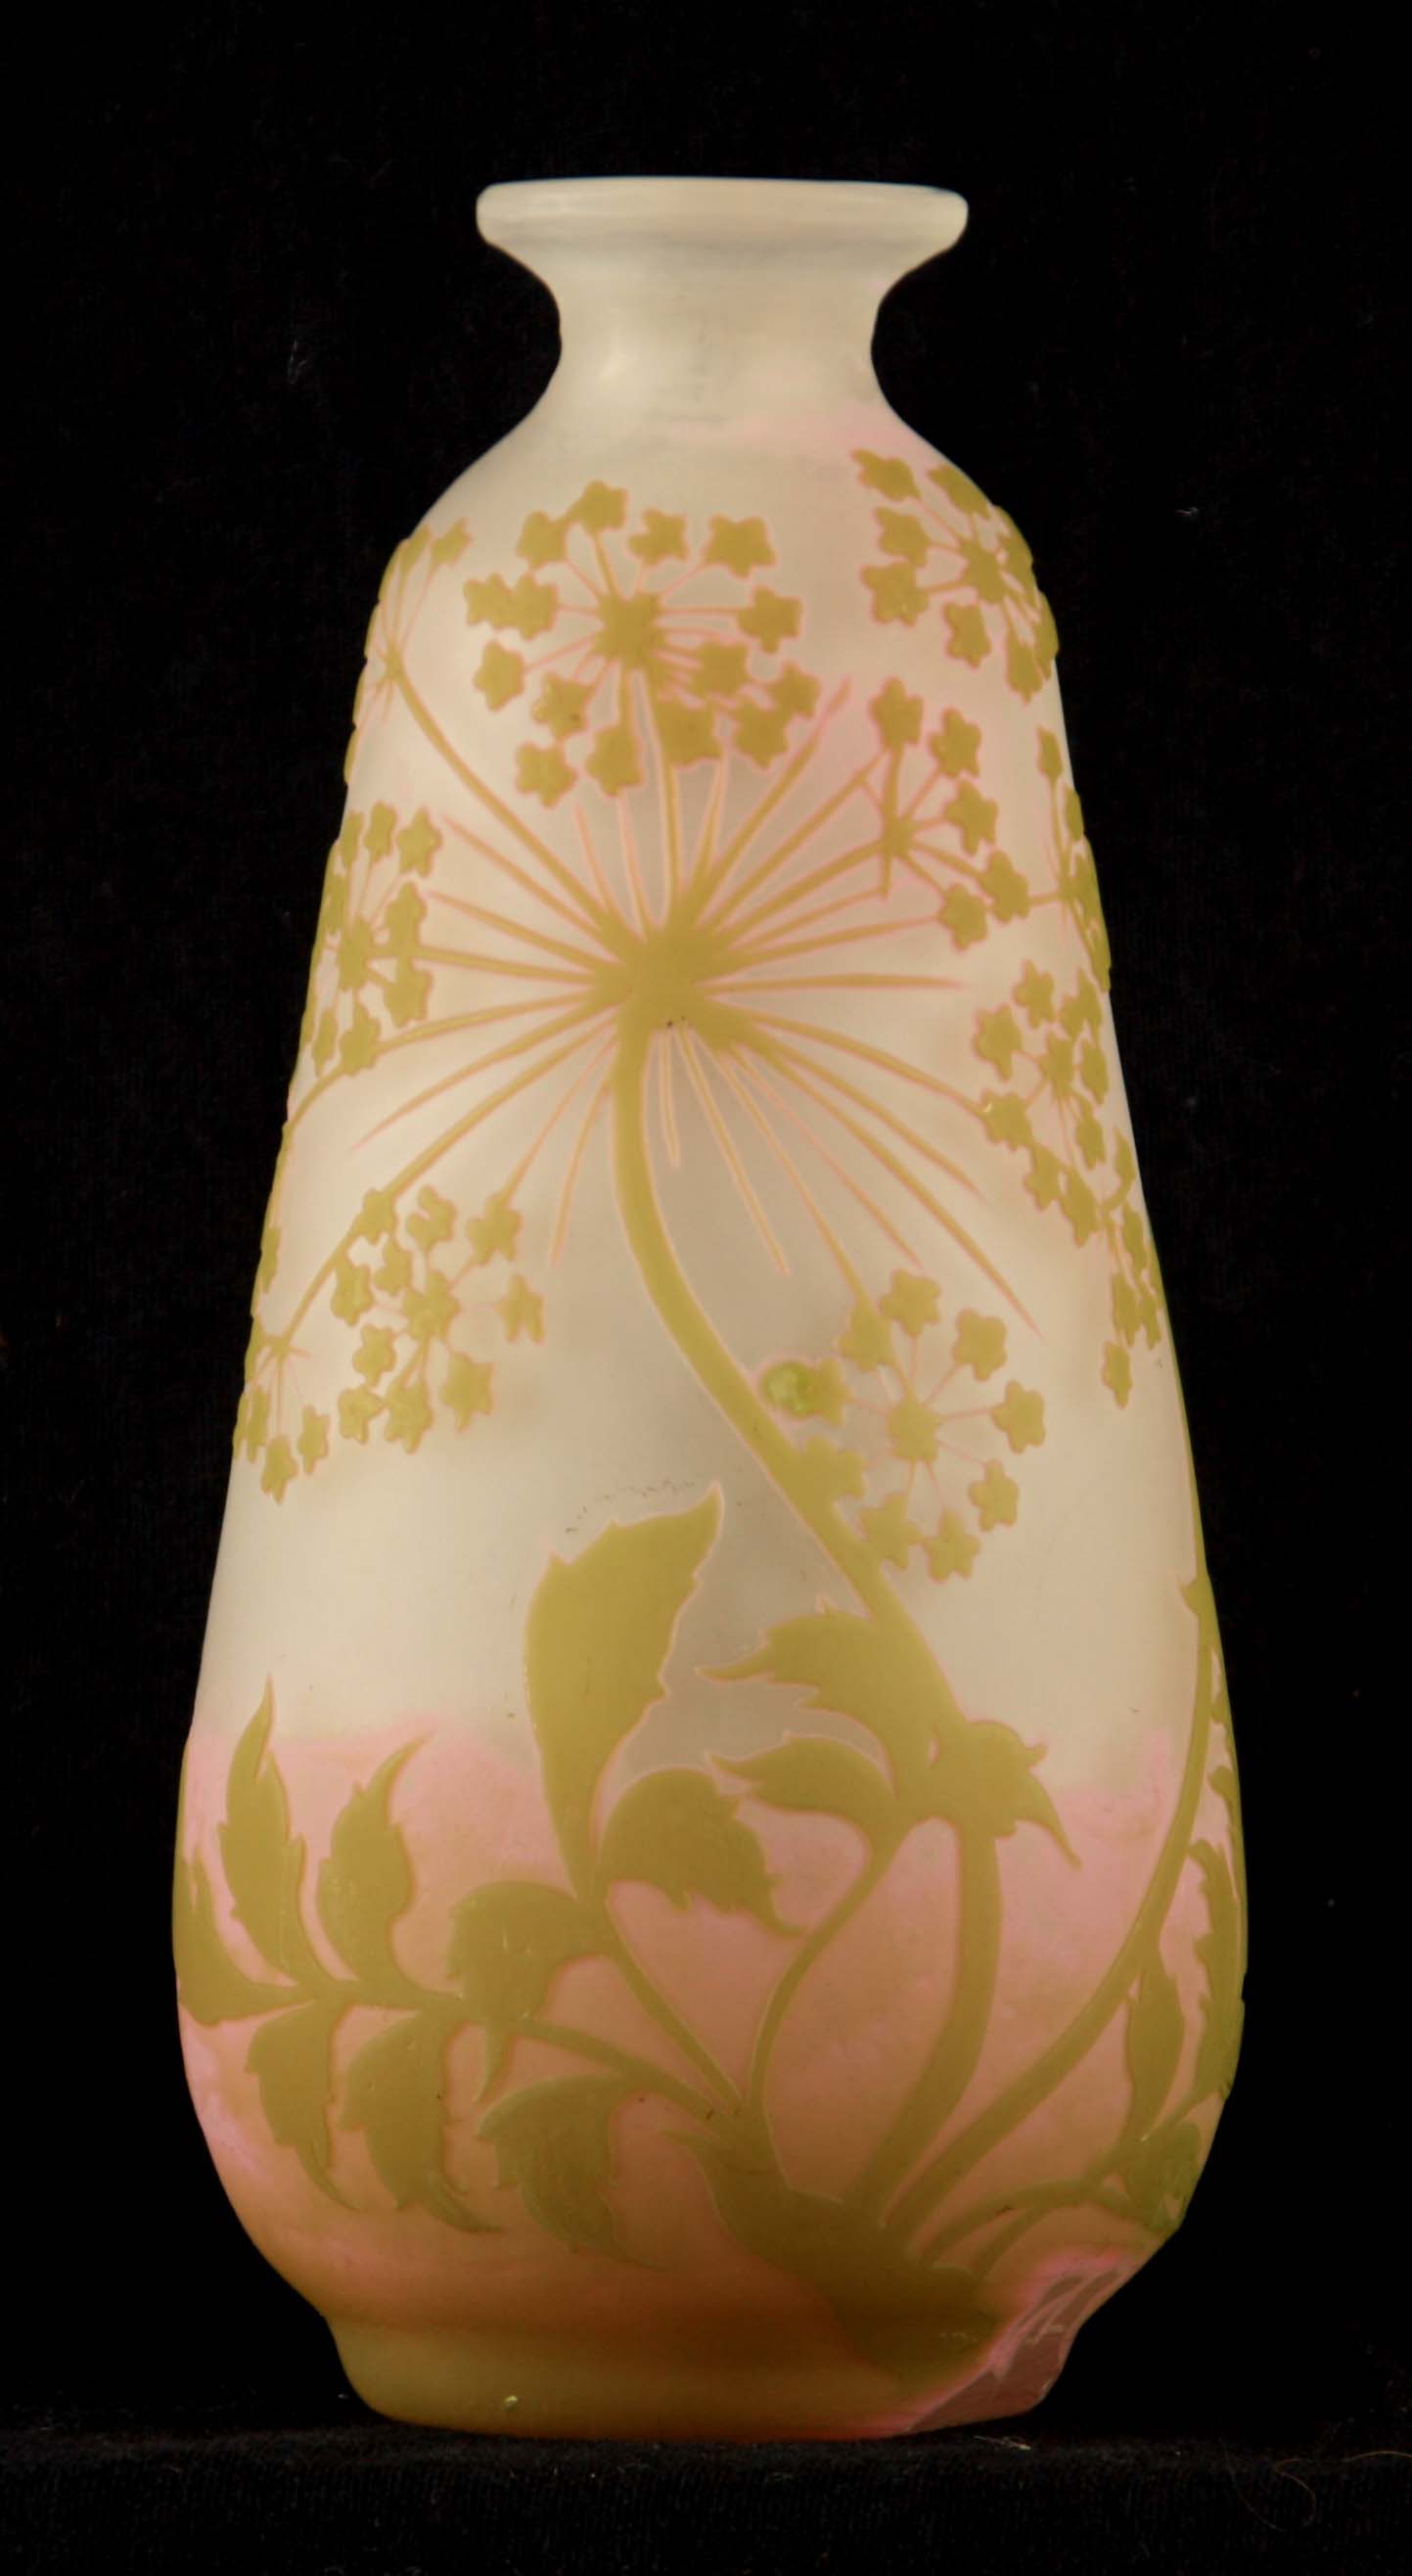 GALLE. AN EARLY 20TH CENTURY GLASS CAMEO VASE of tapering form with floral overlays and raised